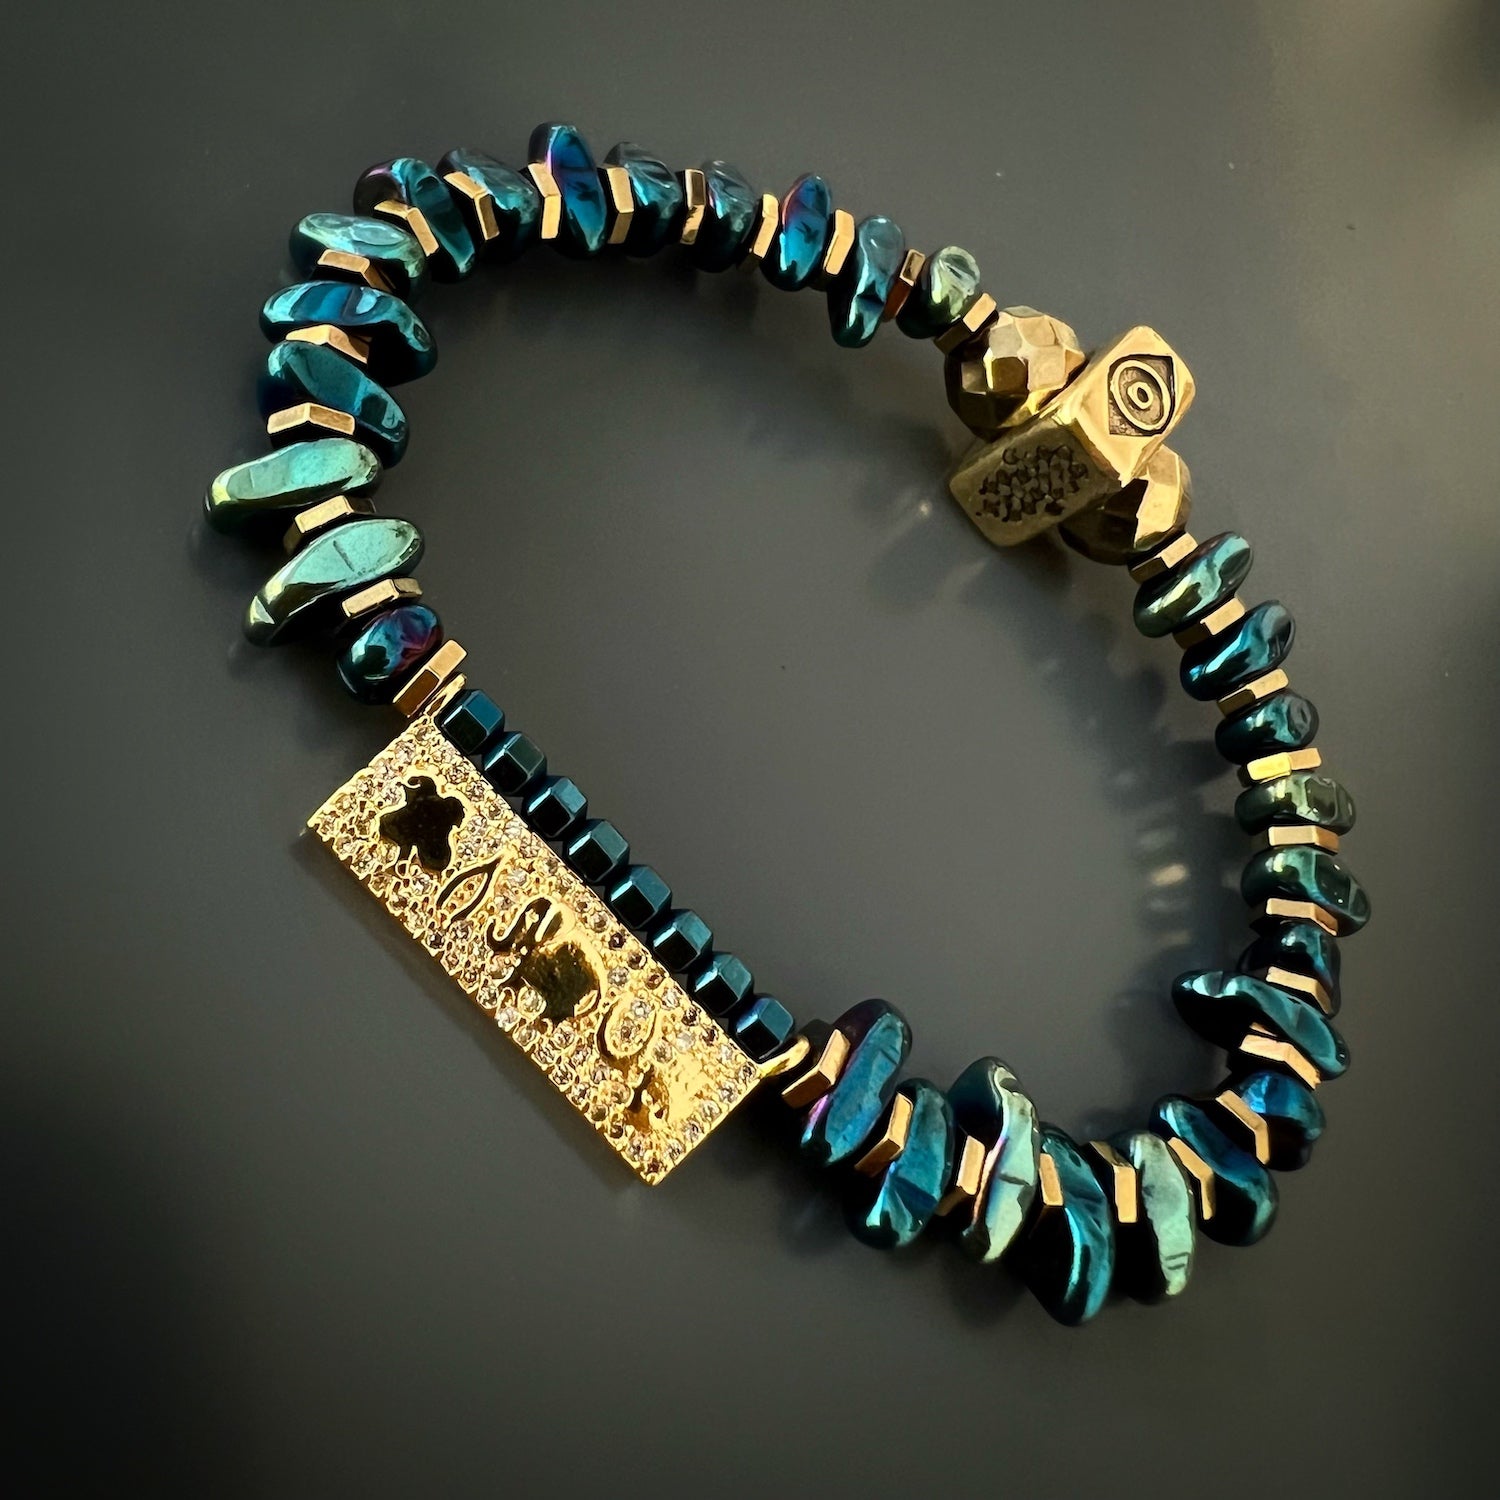 Explore the symbolic significance of the Protection & Luck Blue Hematite Bracelet, adorned with talismanic symbols and blue hematite stones.